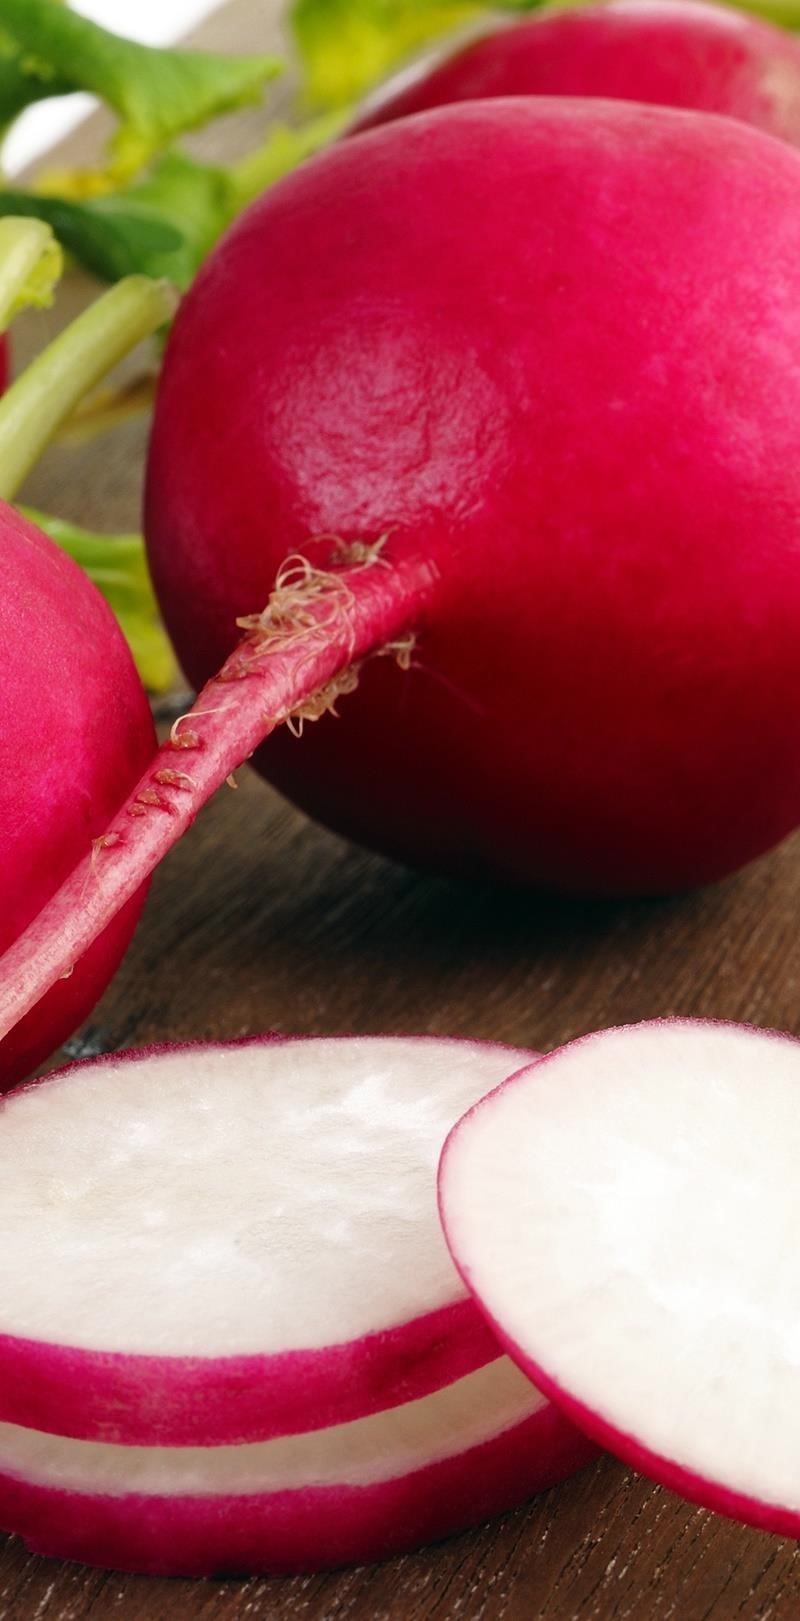 Ingredients 101: The Secret Powers of the Humble Radish